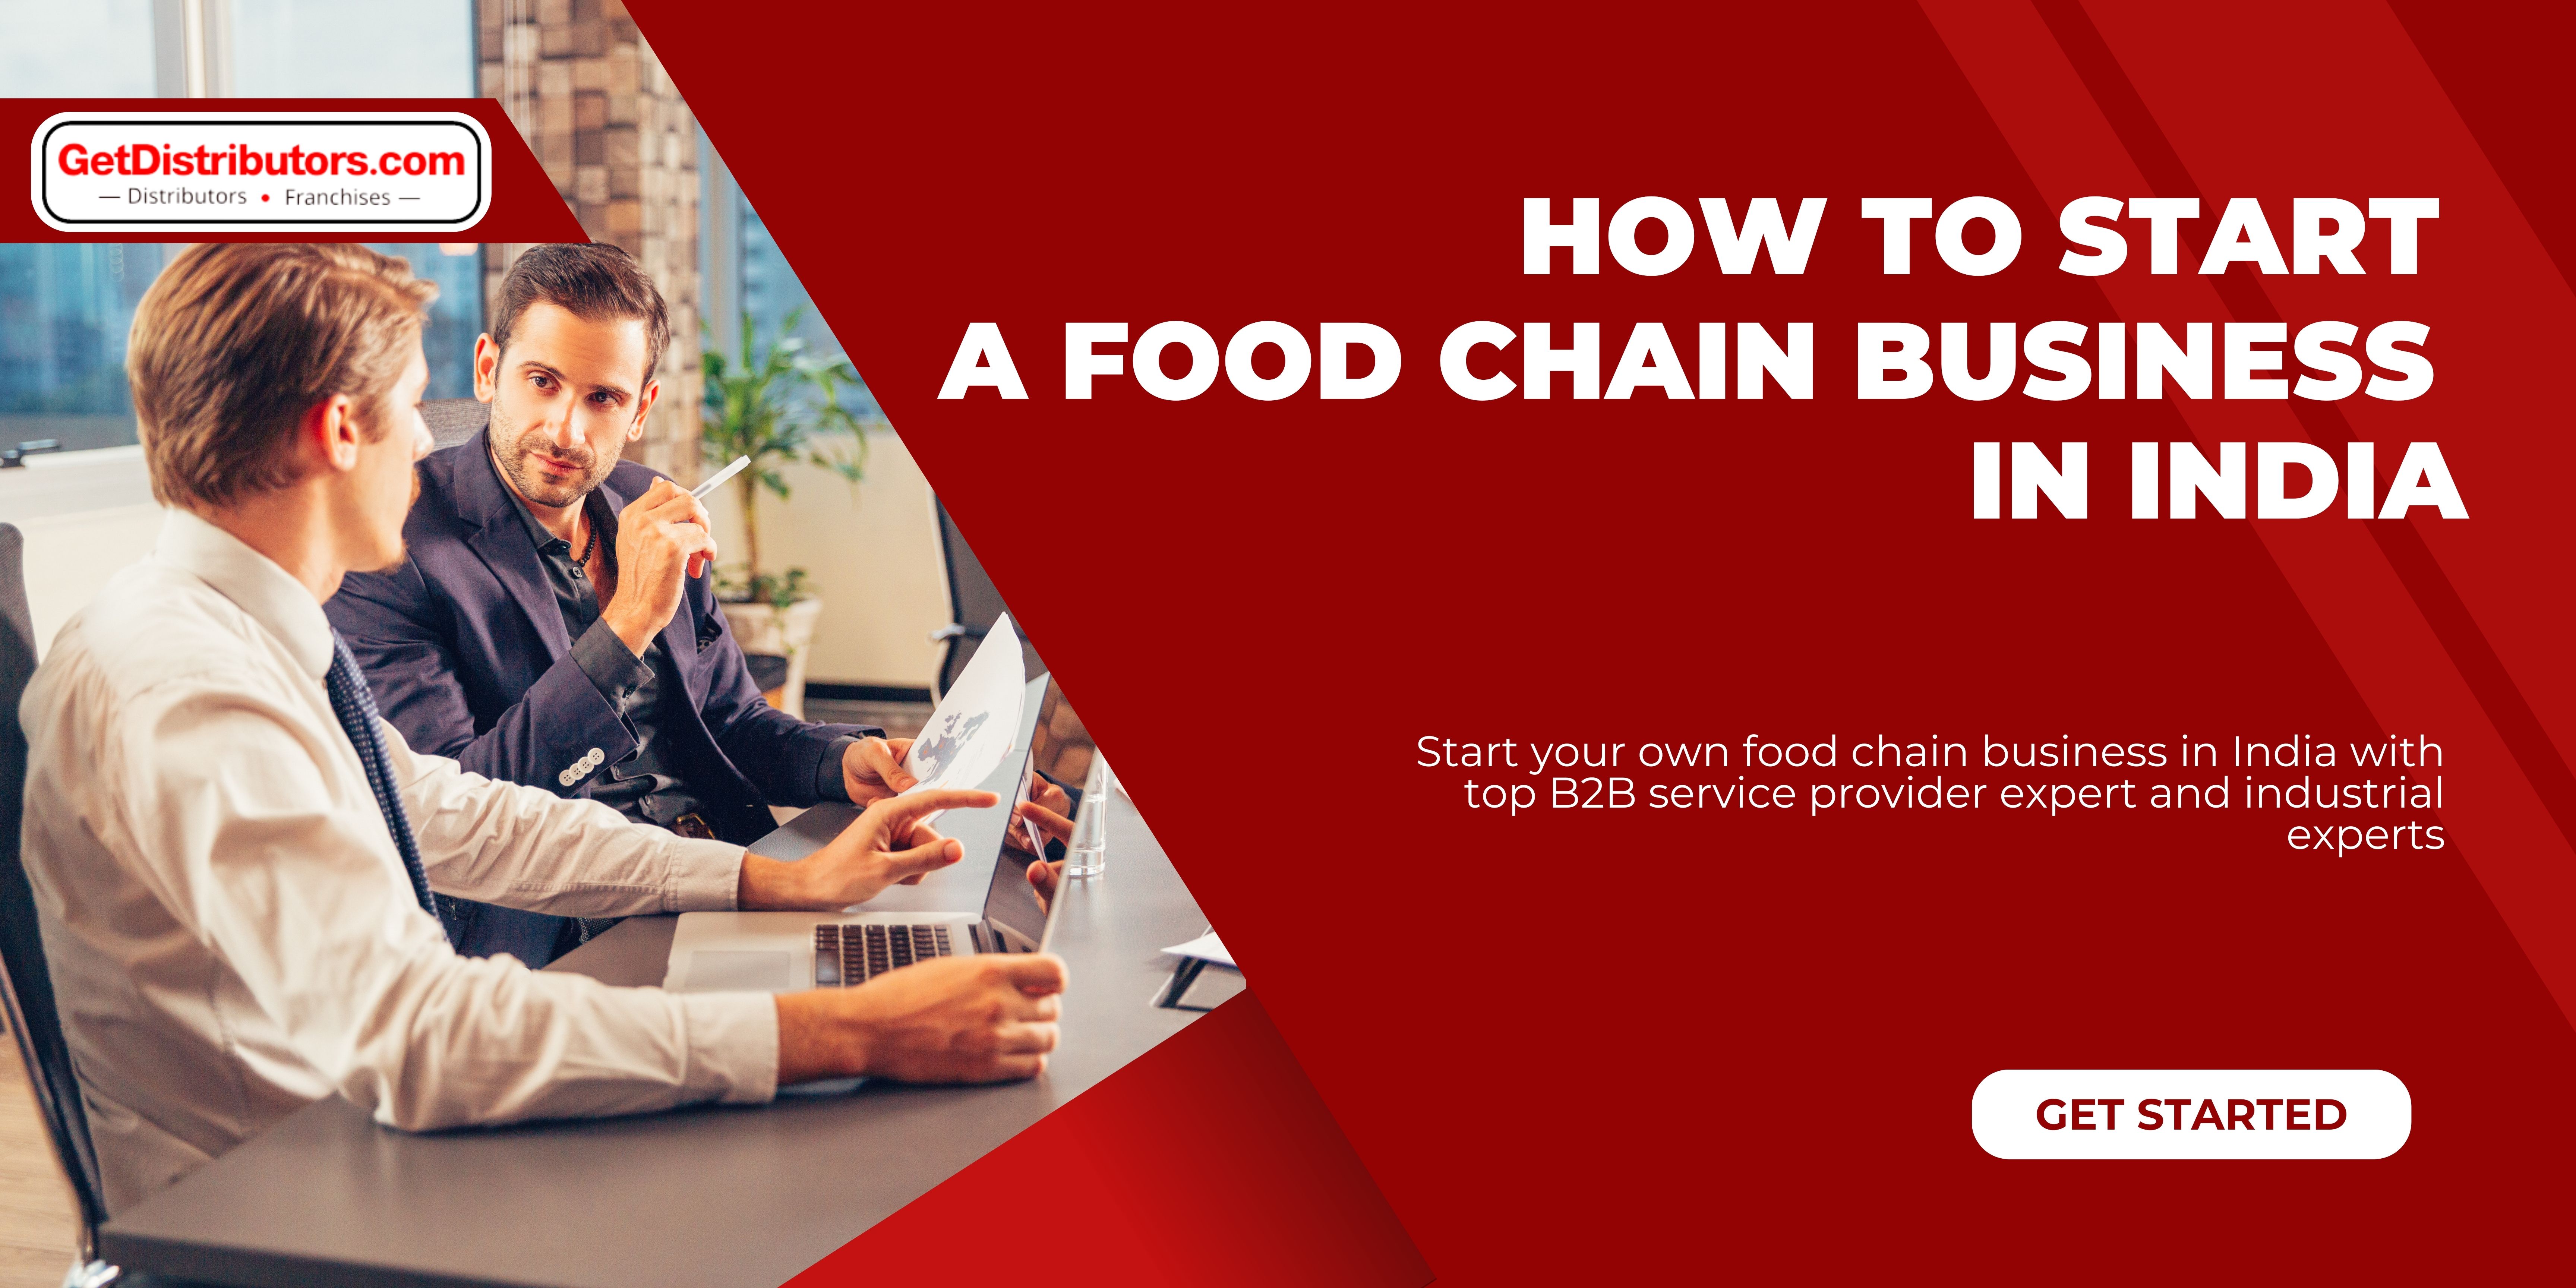 How To Start A Food Chain Business In India